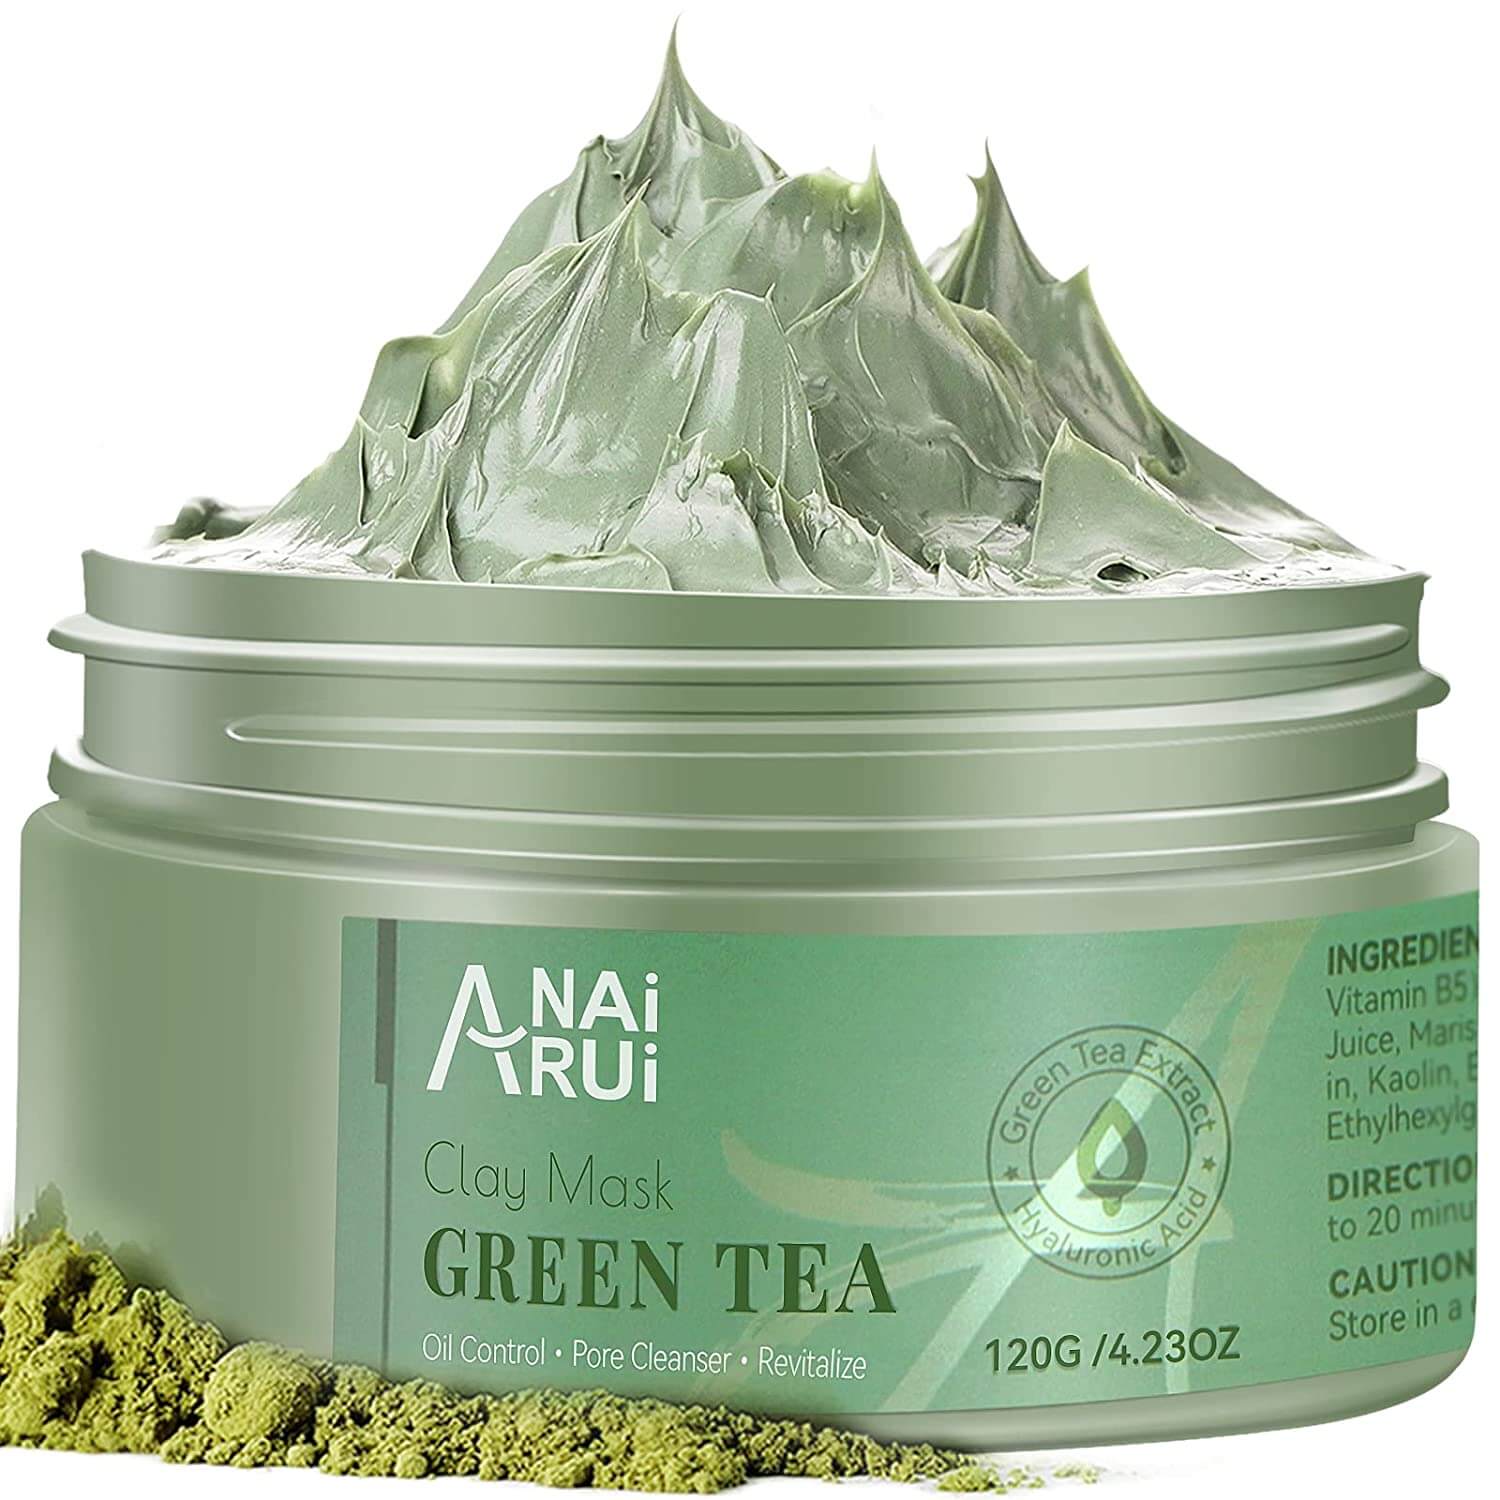 Benefits of Sotrue's Green Tea Cleansing Face Mask